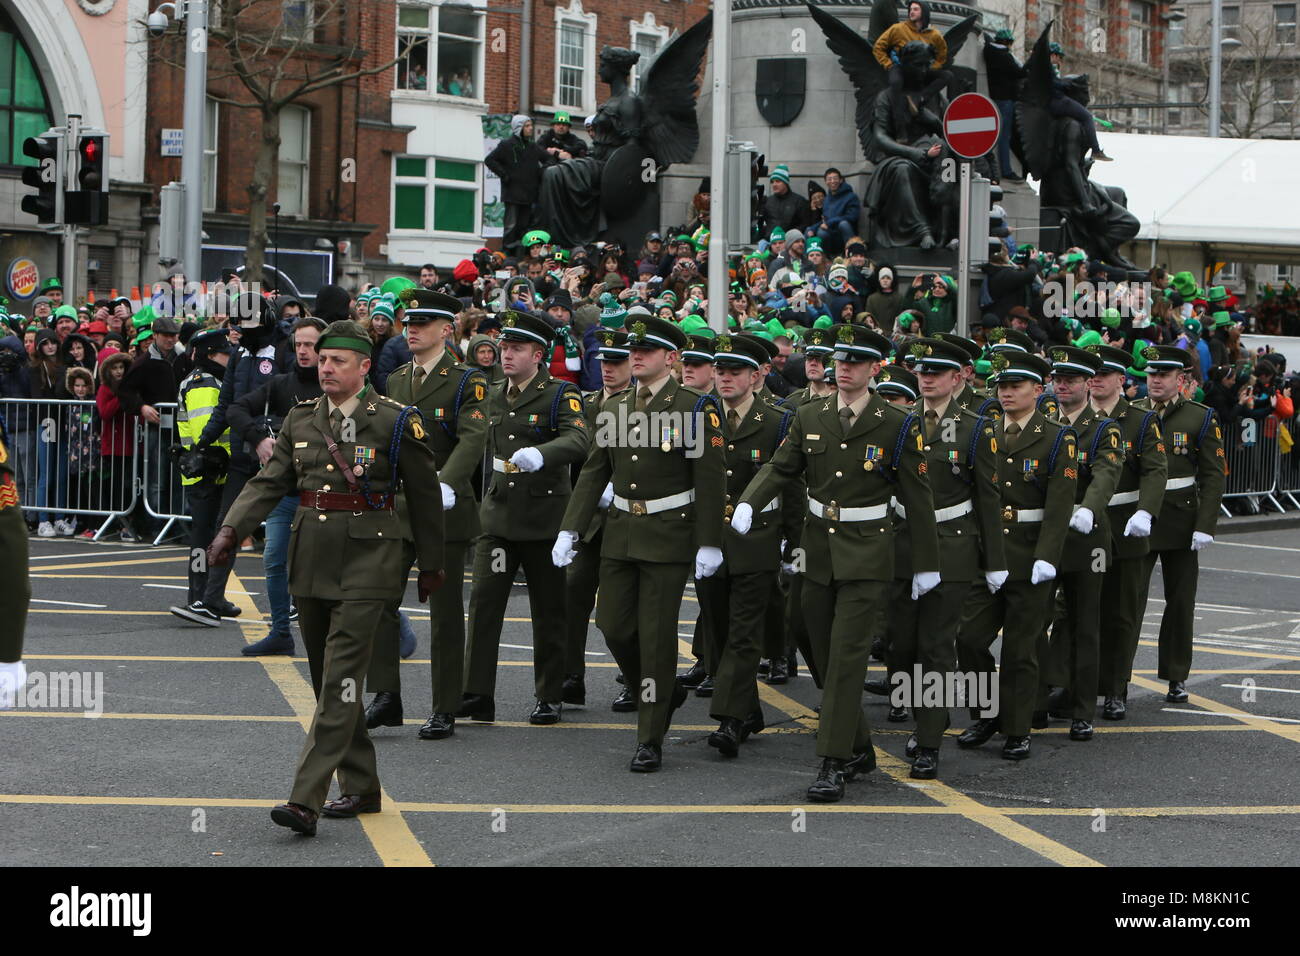 Irish Army Officers march on O'Connell Street. Image from Dublin city centre during the Saint Patrick's Day parade as part of the annual Saint Patrick Stock Photo